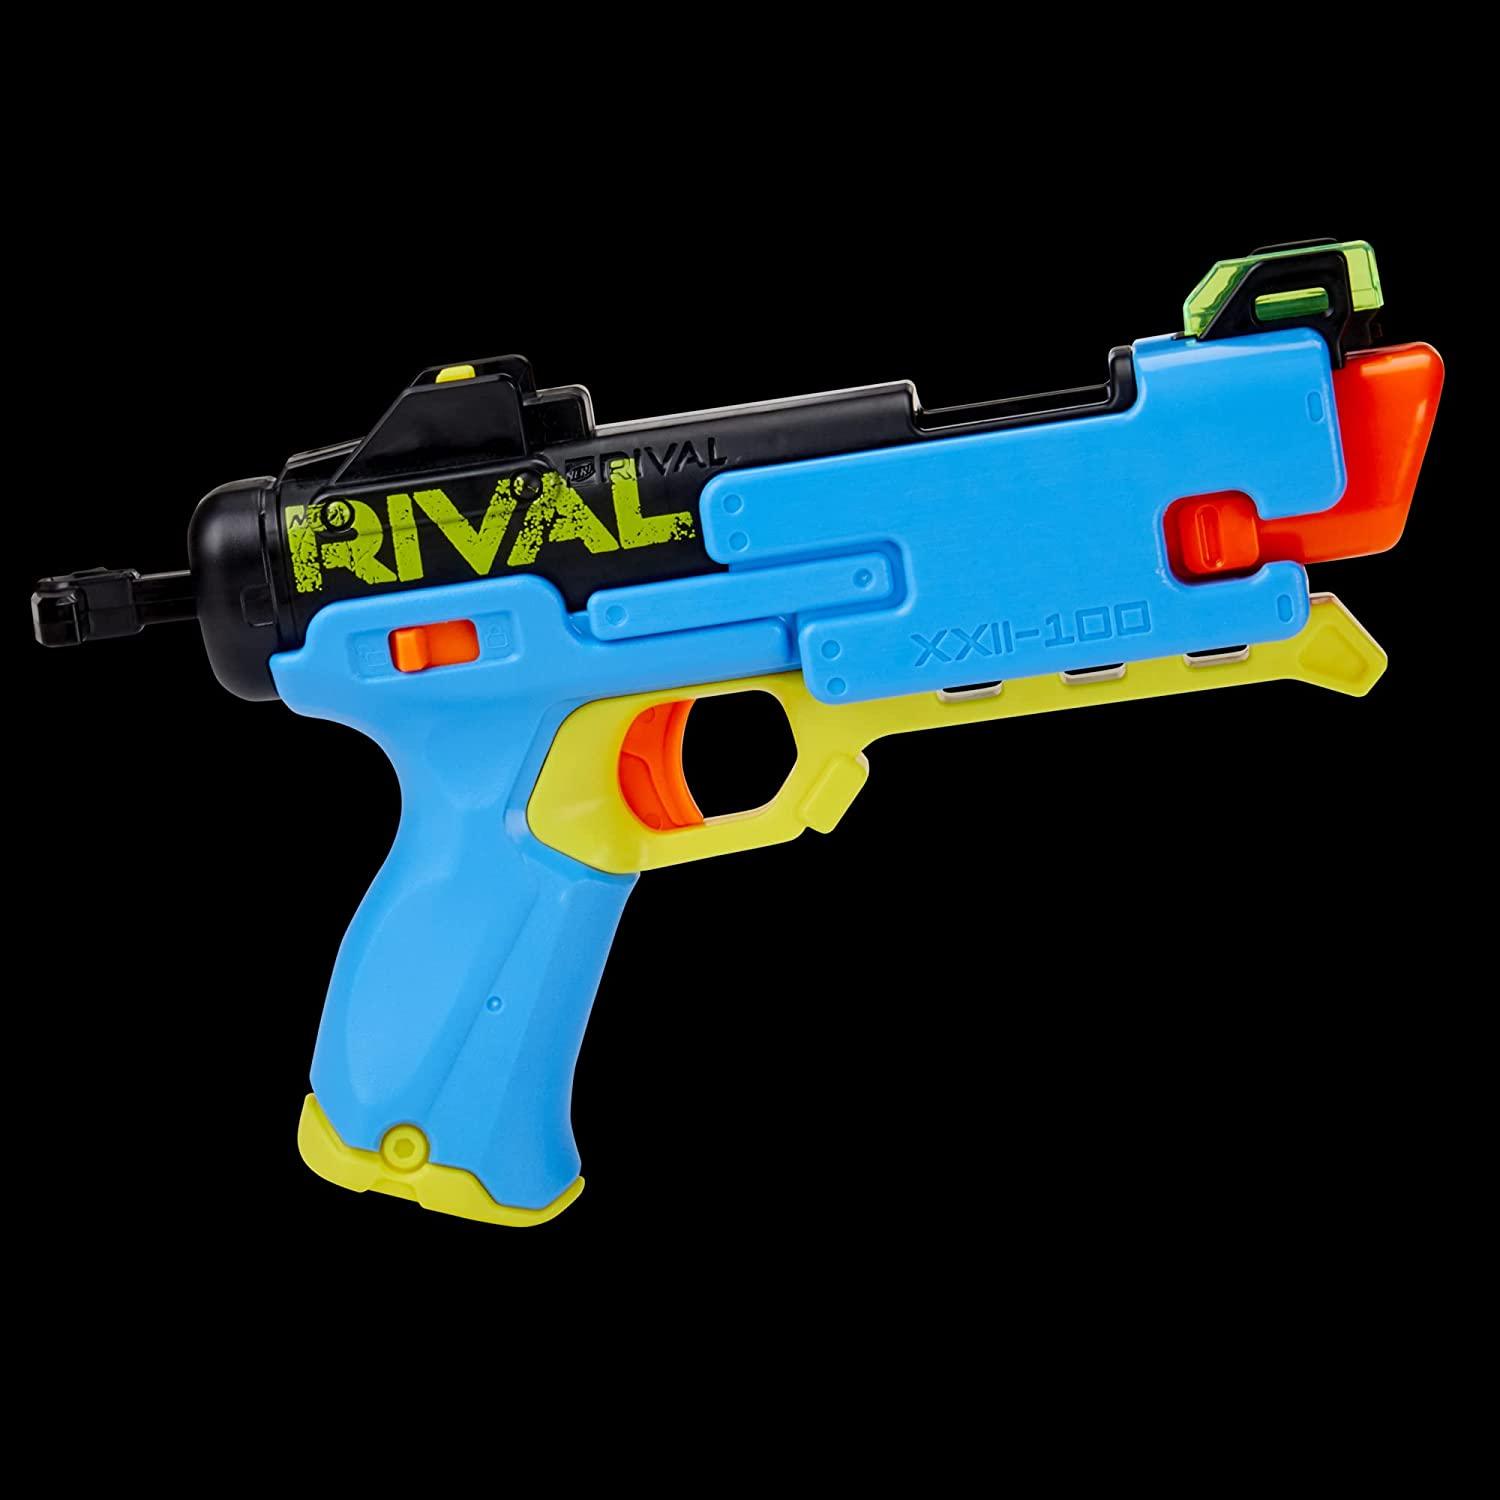 Nerf Rival Fate XXII-100 Blaster, Most Accurate Nerf Rival System, Adjustable Rear Sight, Breech Load, Includes 3 Nerf Rival Accu-Rounds - FunCorp India